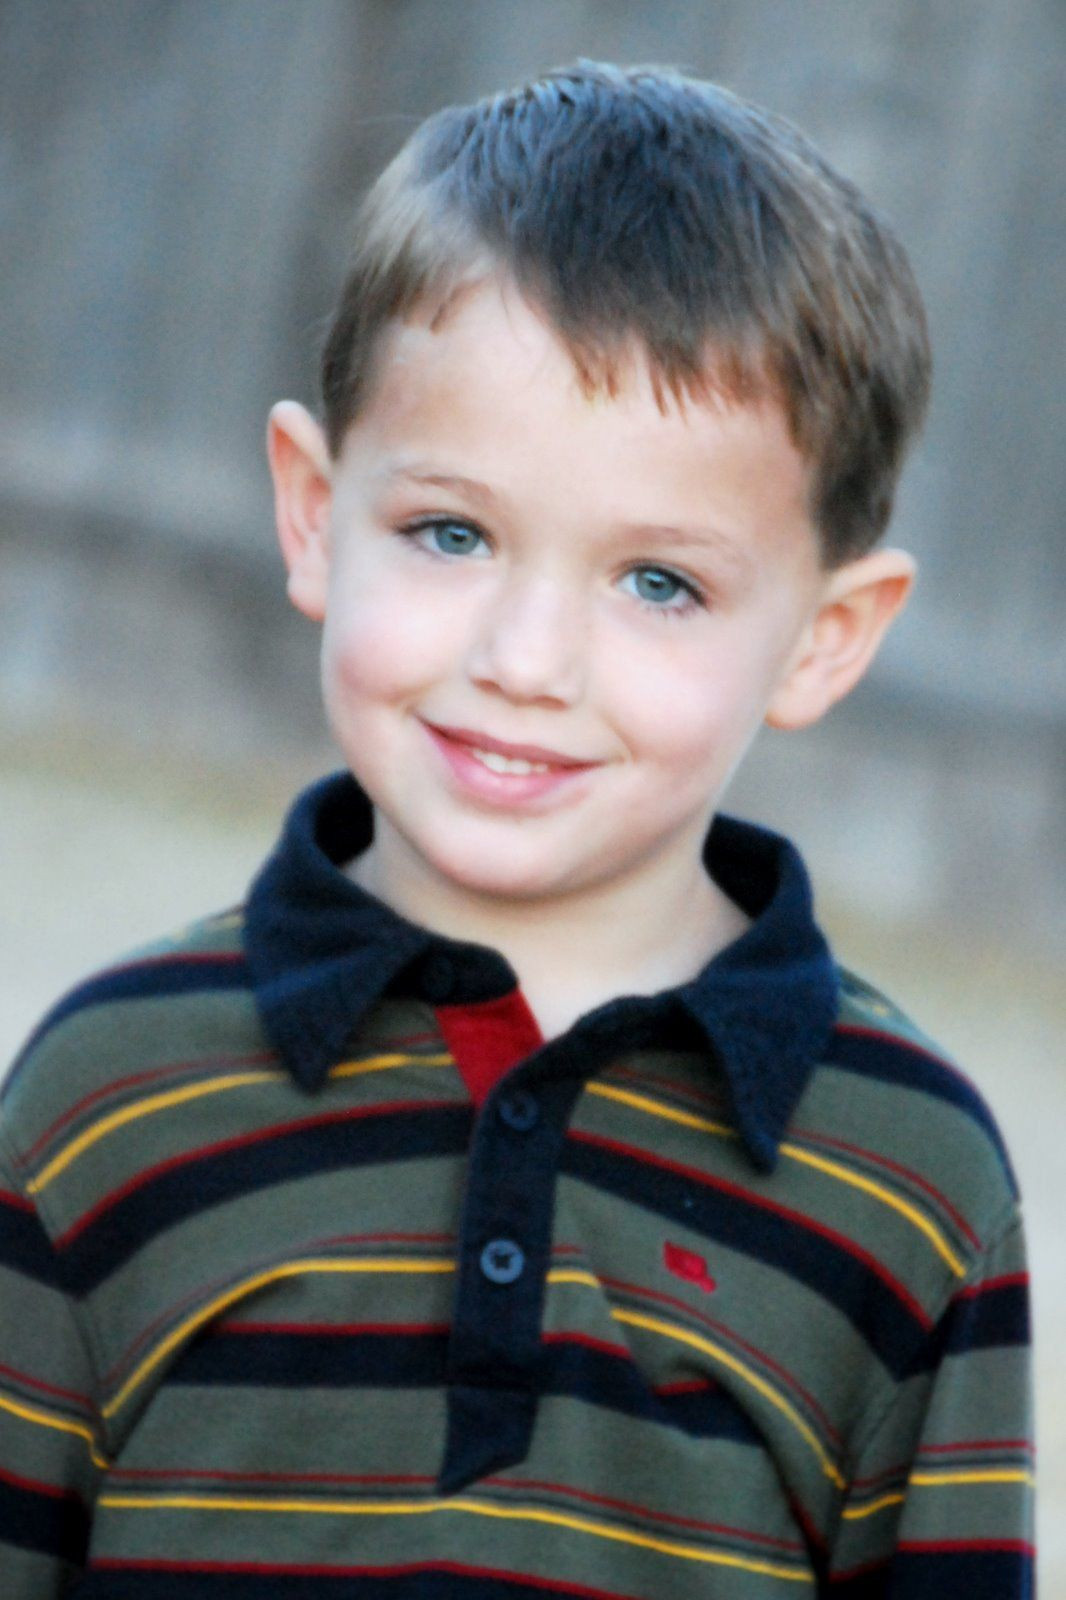 23 Of the Best Ideas for 6 Year Old Boy Haircuts - Home, Family, Style ...